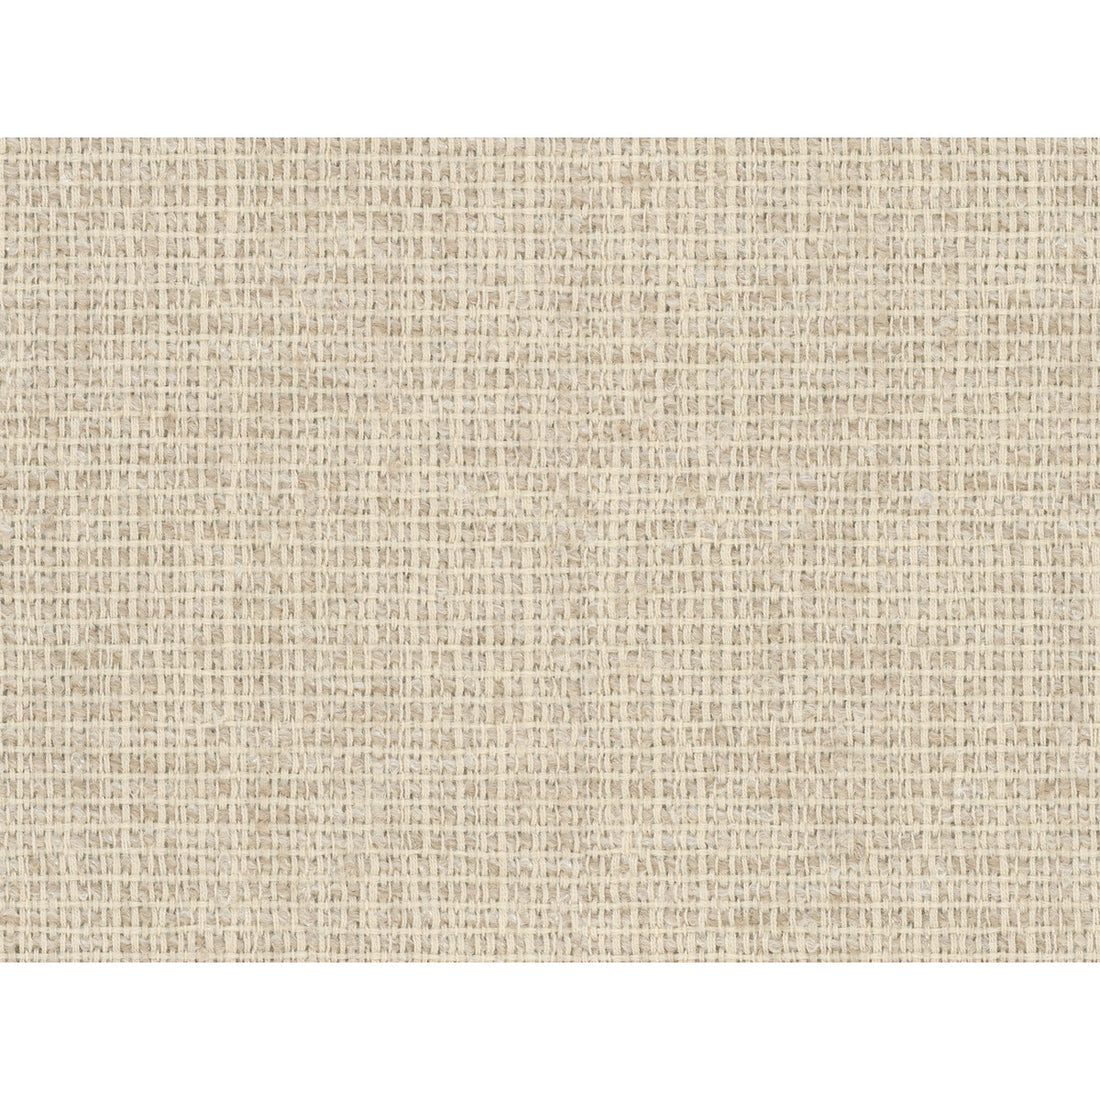 Benefit fabric in oyster color - pattern 34664.111.0 - by Kravet Contract in the Gis collection